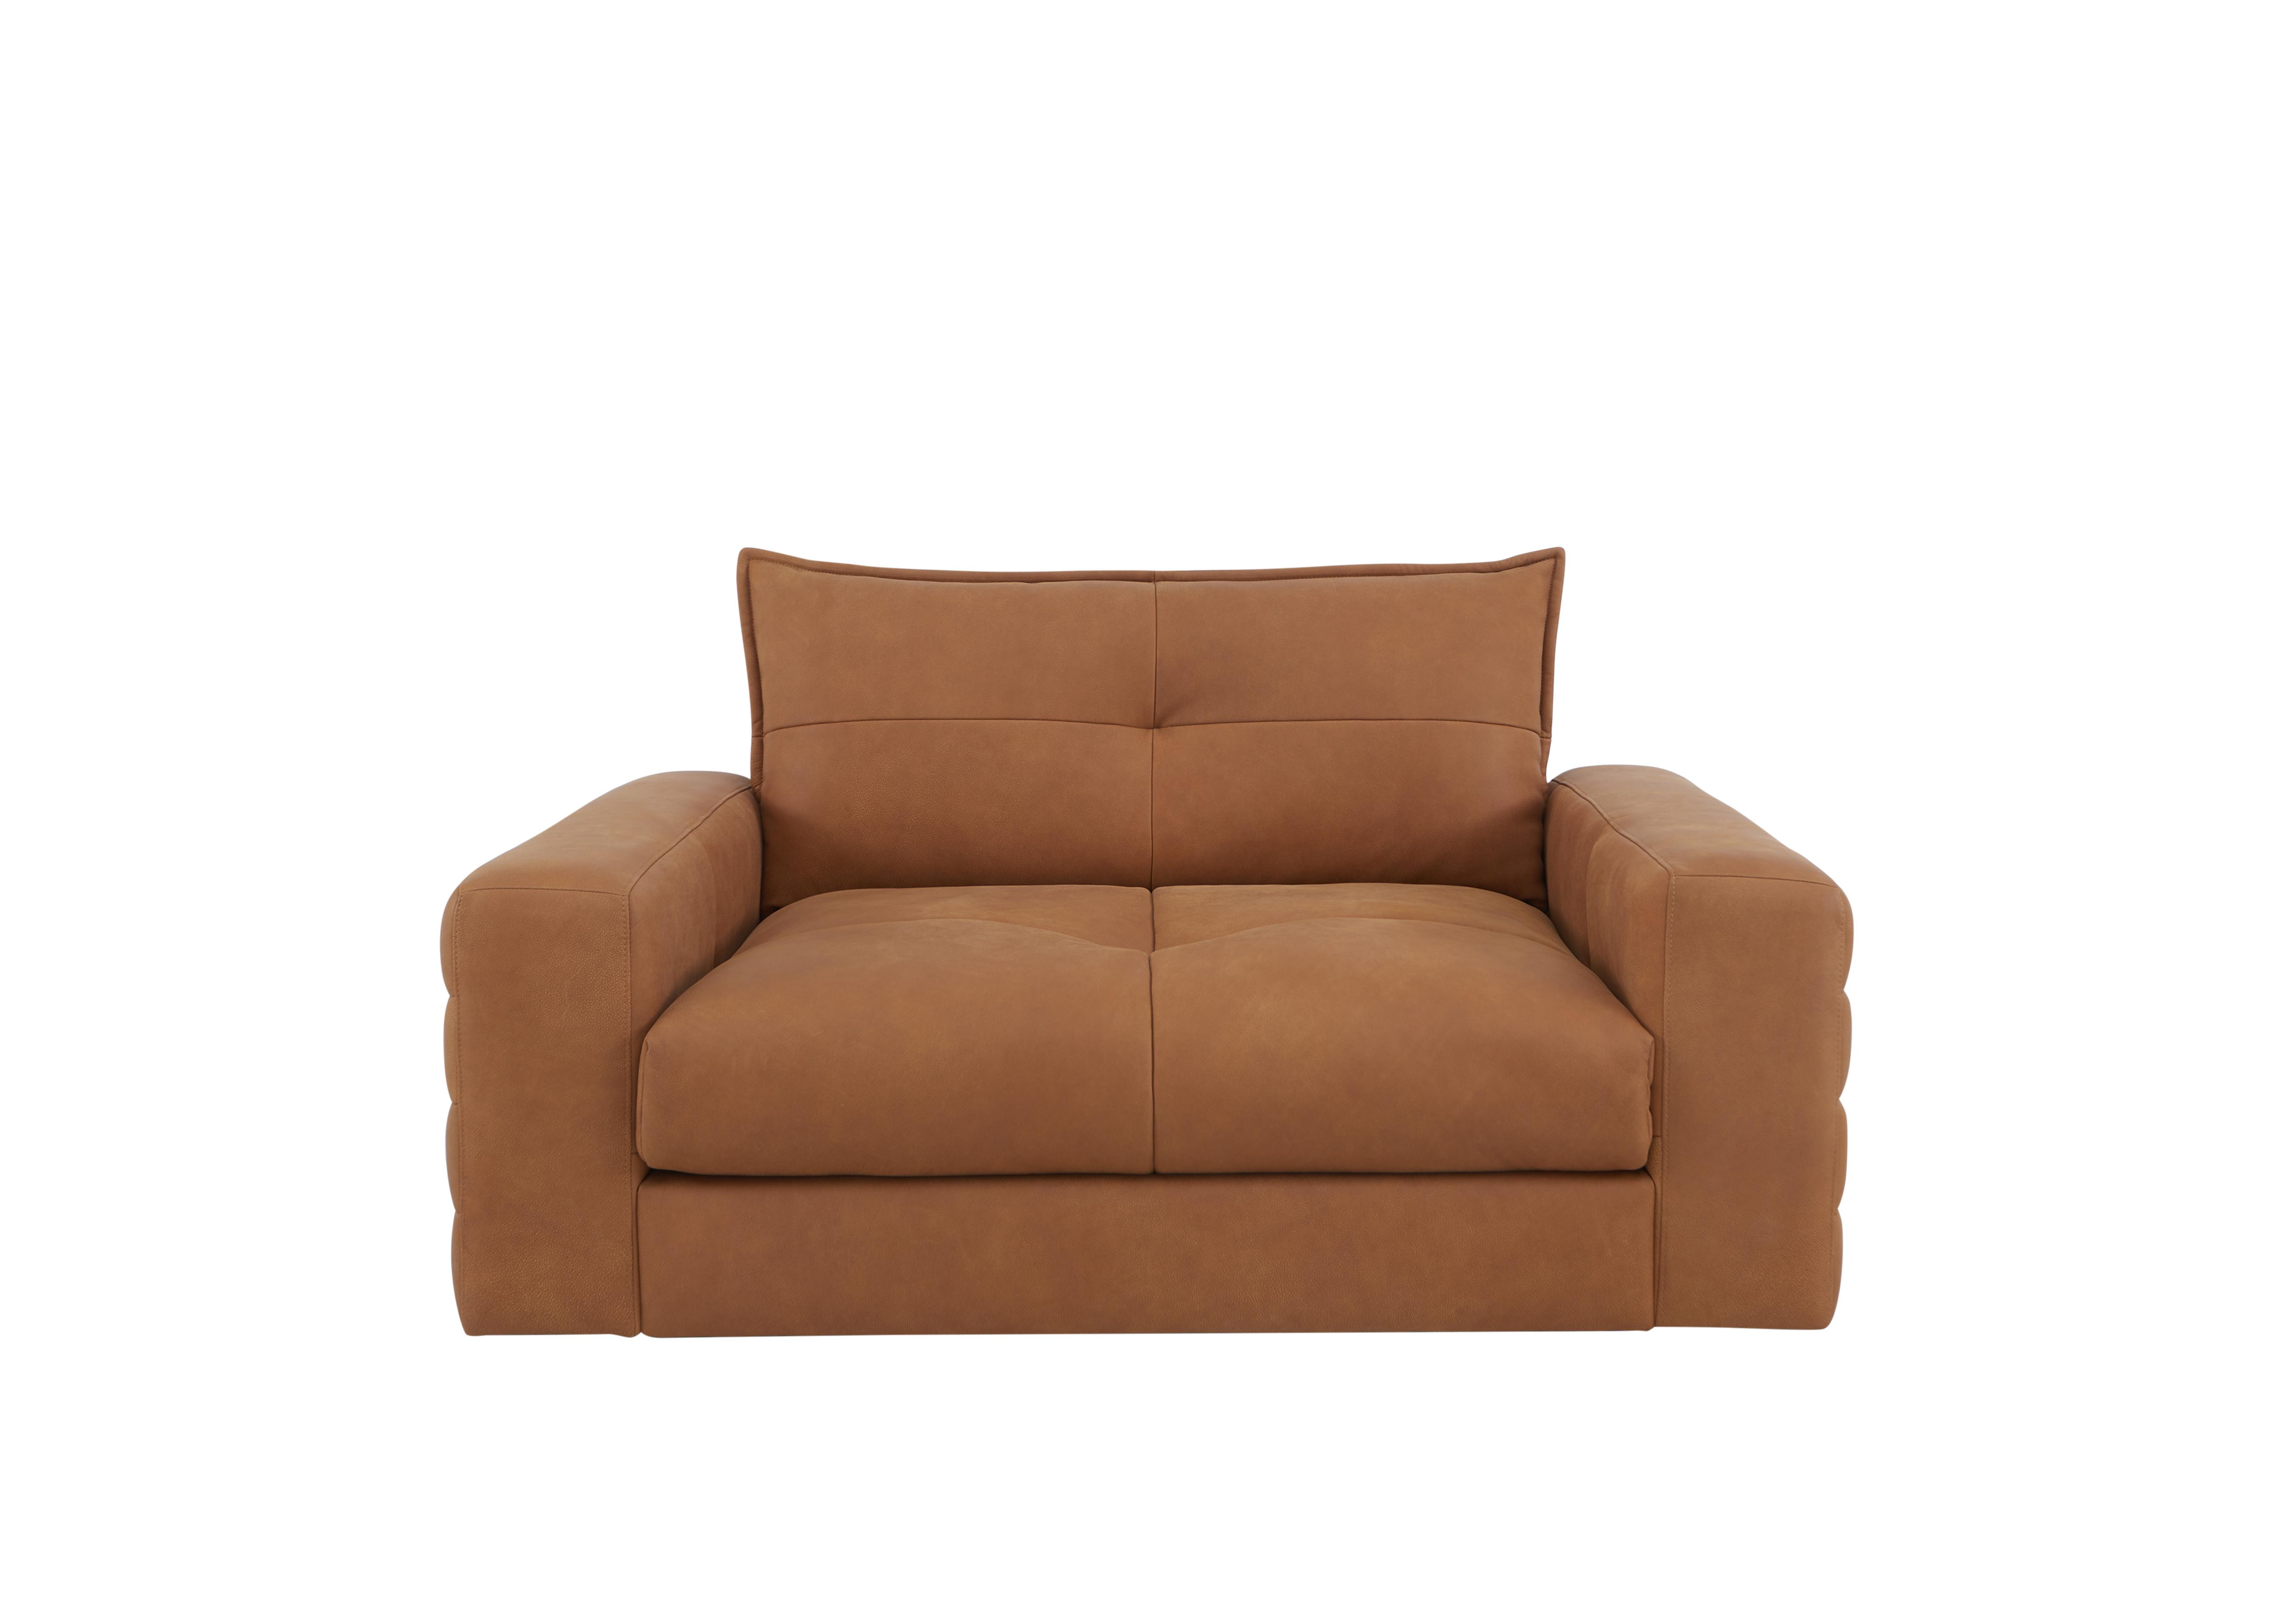 Boutique Brando Leather Snuggler in Stone Washed Tan on Furniture Village